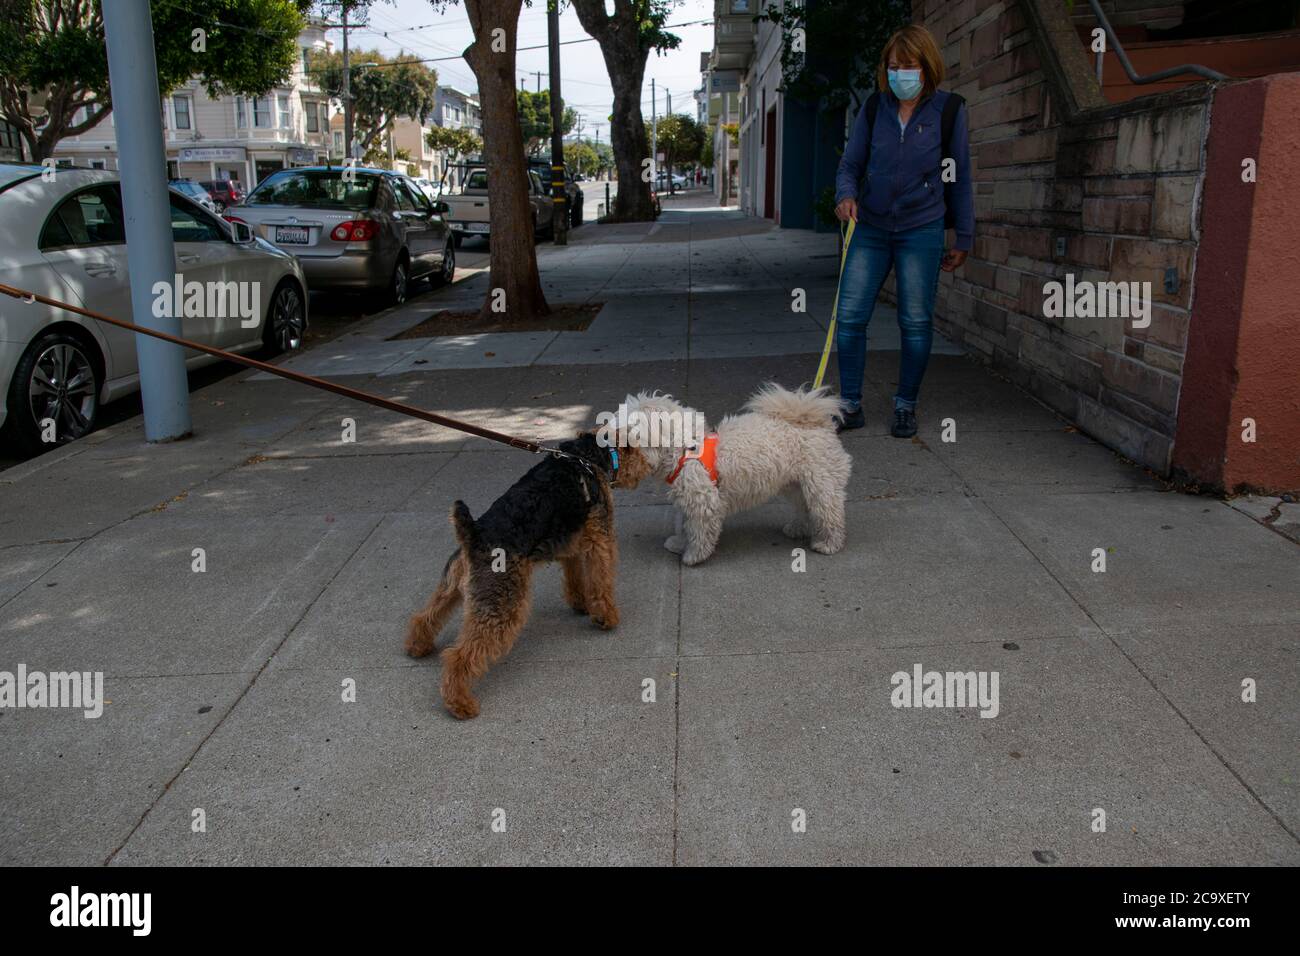 A pair of dog walkers stop for a chat on the sidewalk in the Noe Valley neighborhood of San Francisco, CA, USA. Stock Photo